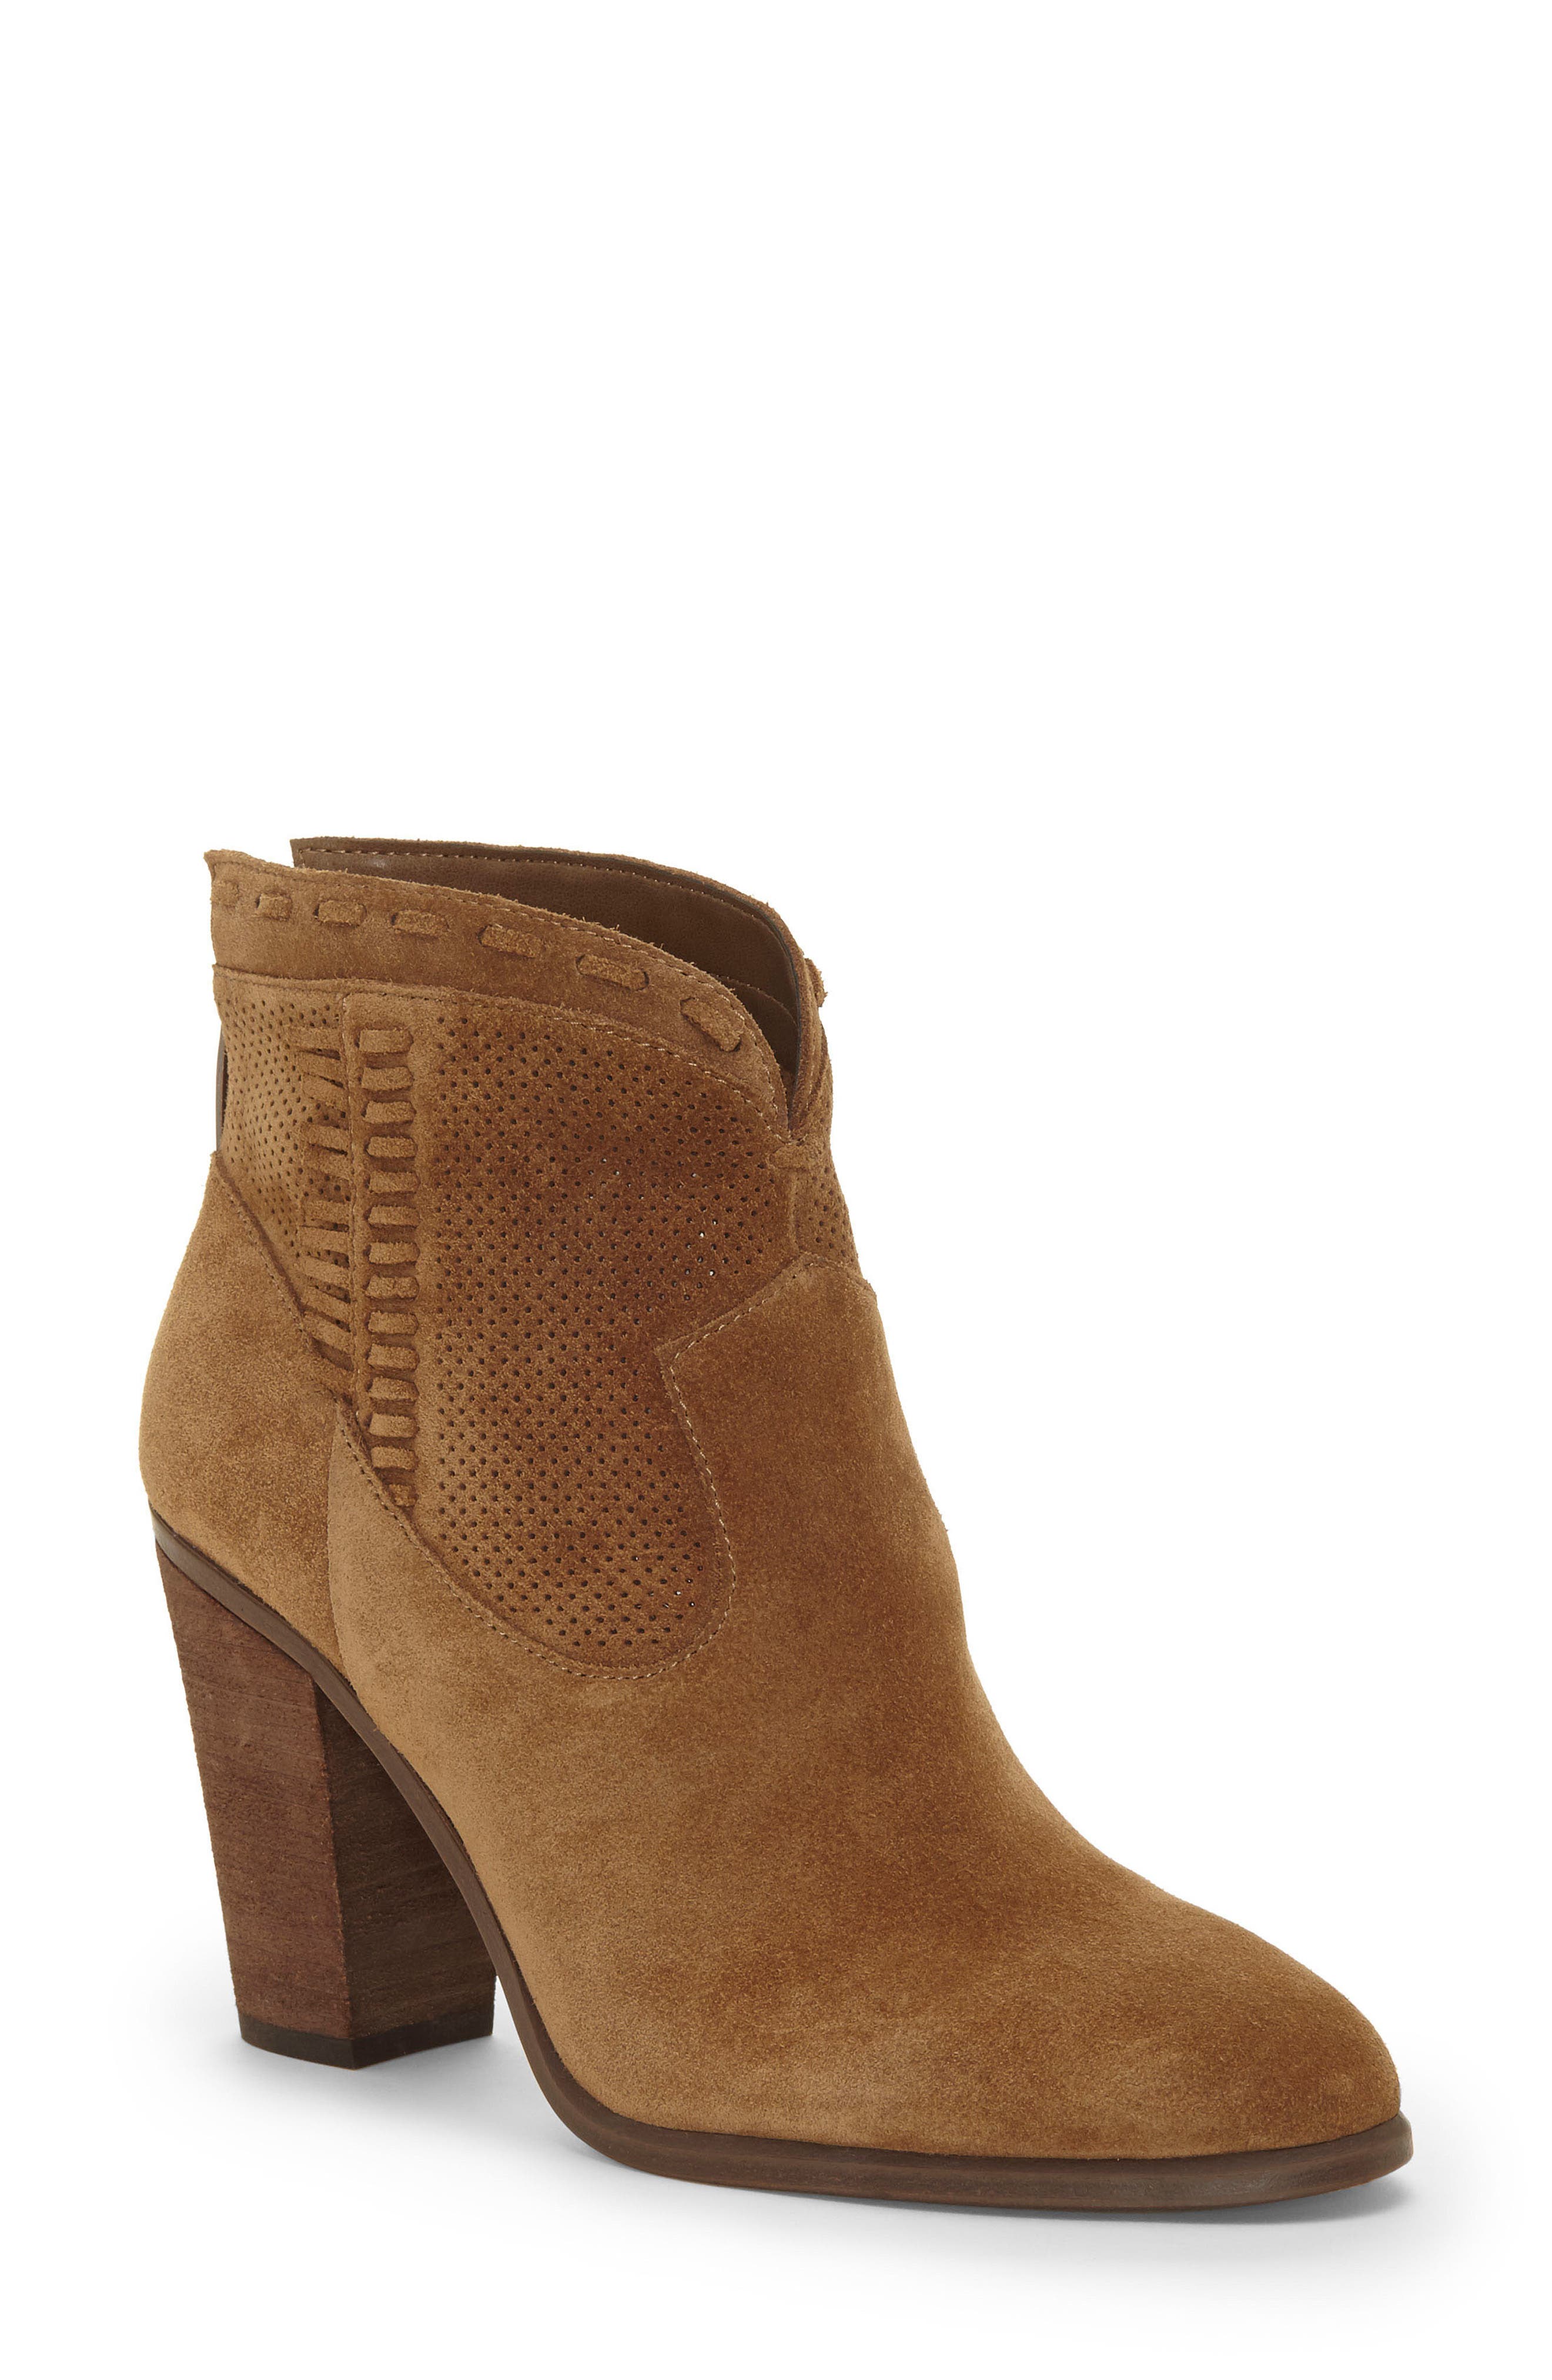 vince camuto fretzia perforated boot